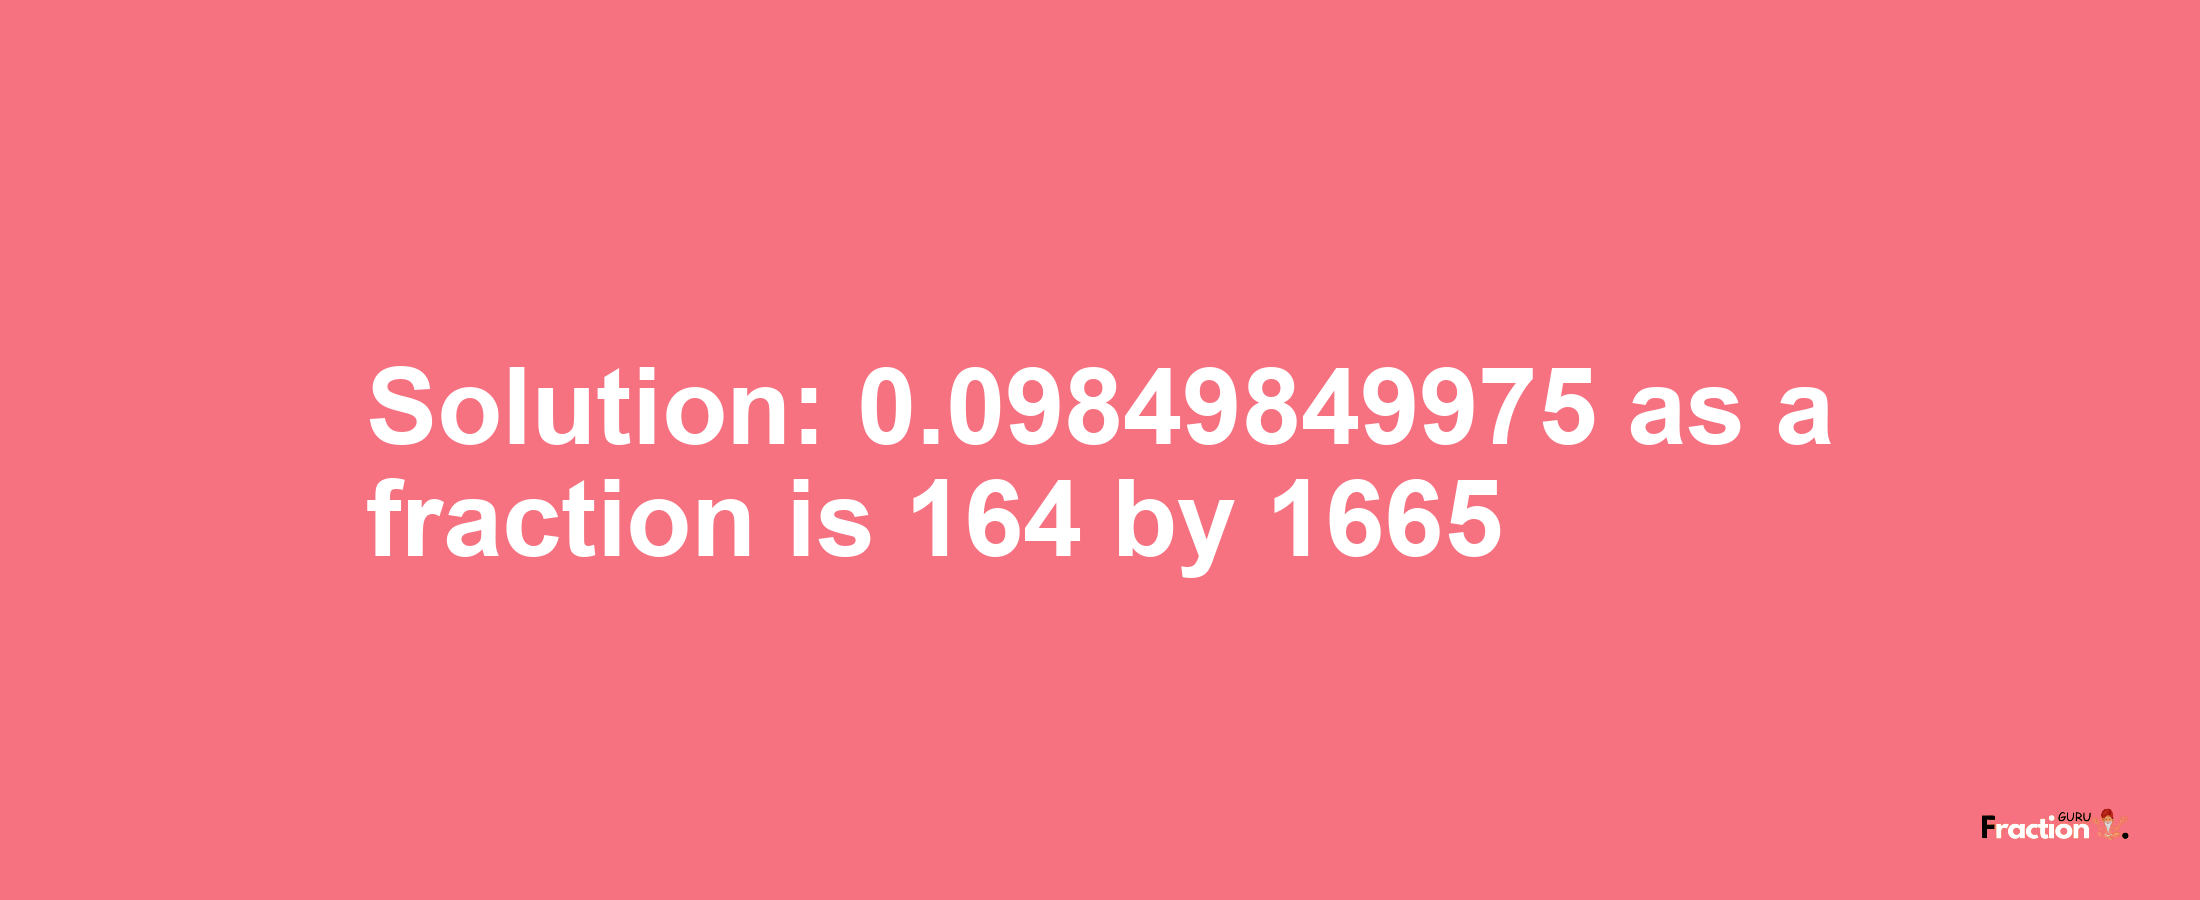 Solution:0.09849849975 as a fraction is 164/1665